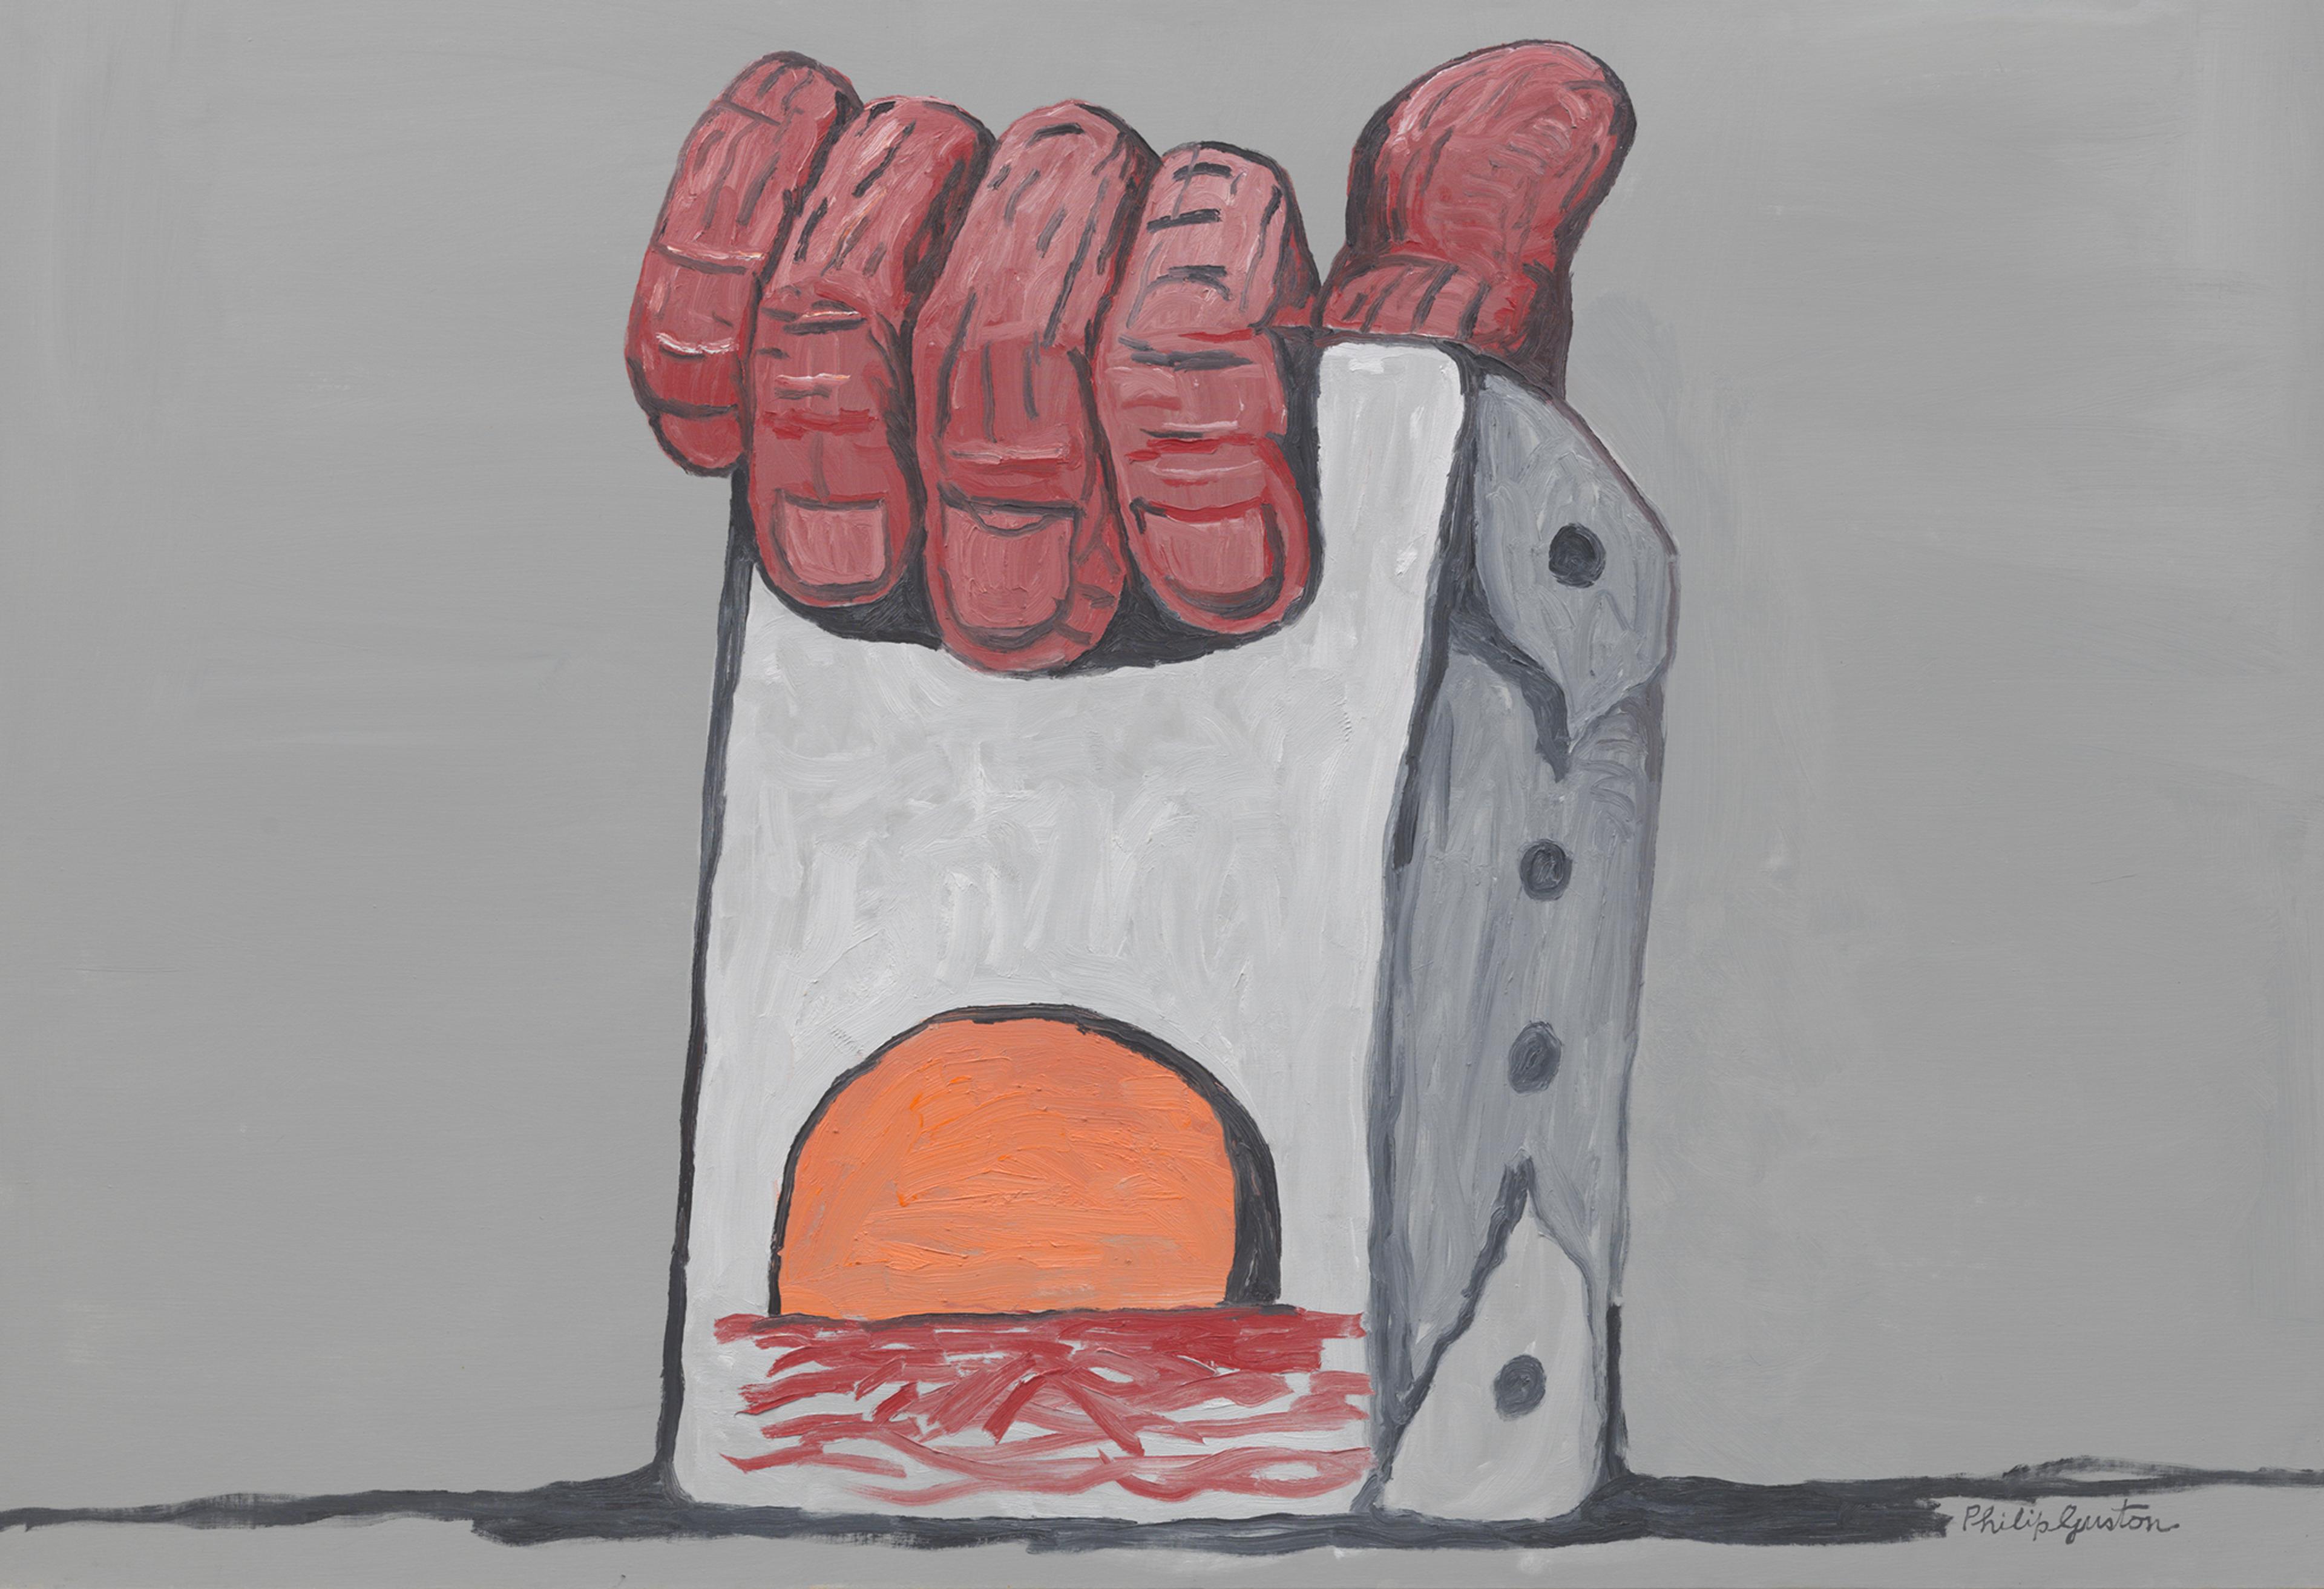 Painting by Phillip Guston with a hand holding a canvas with a sunset on it against a grey background. 